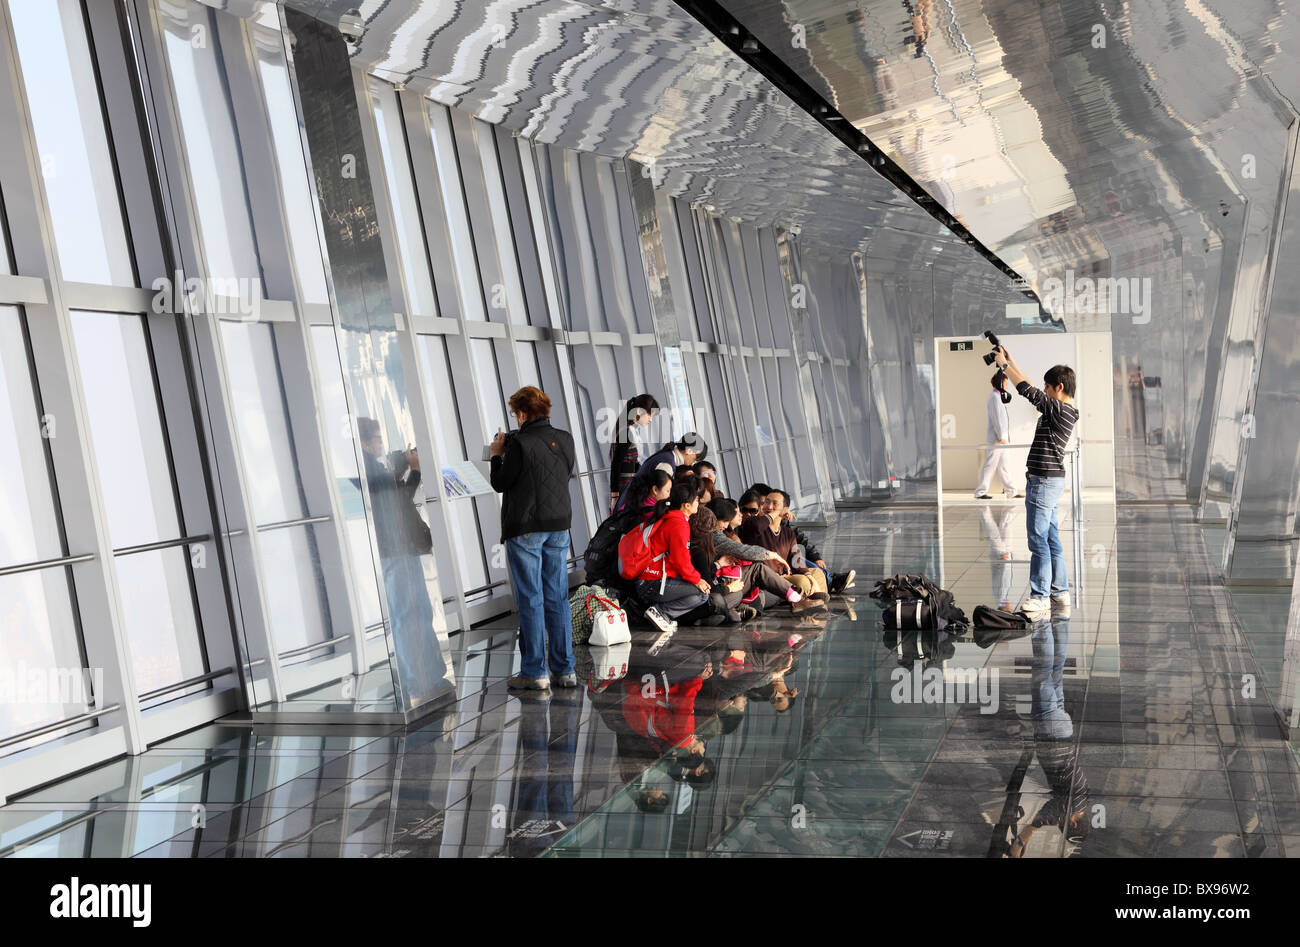 Observation Platform of the Shanghai World Financial Center (SWFC), Pudong Shanghai China. Stock Photo